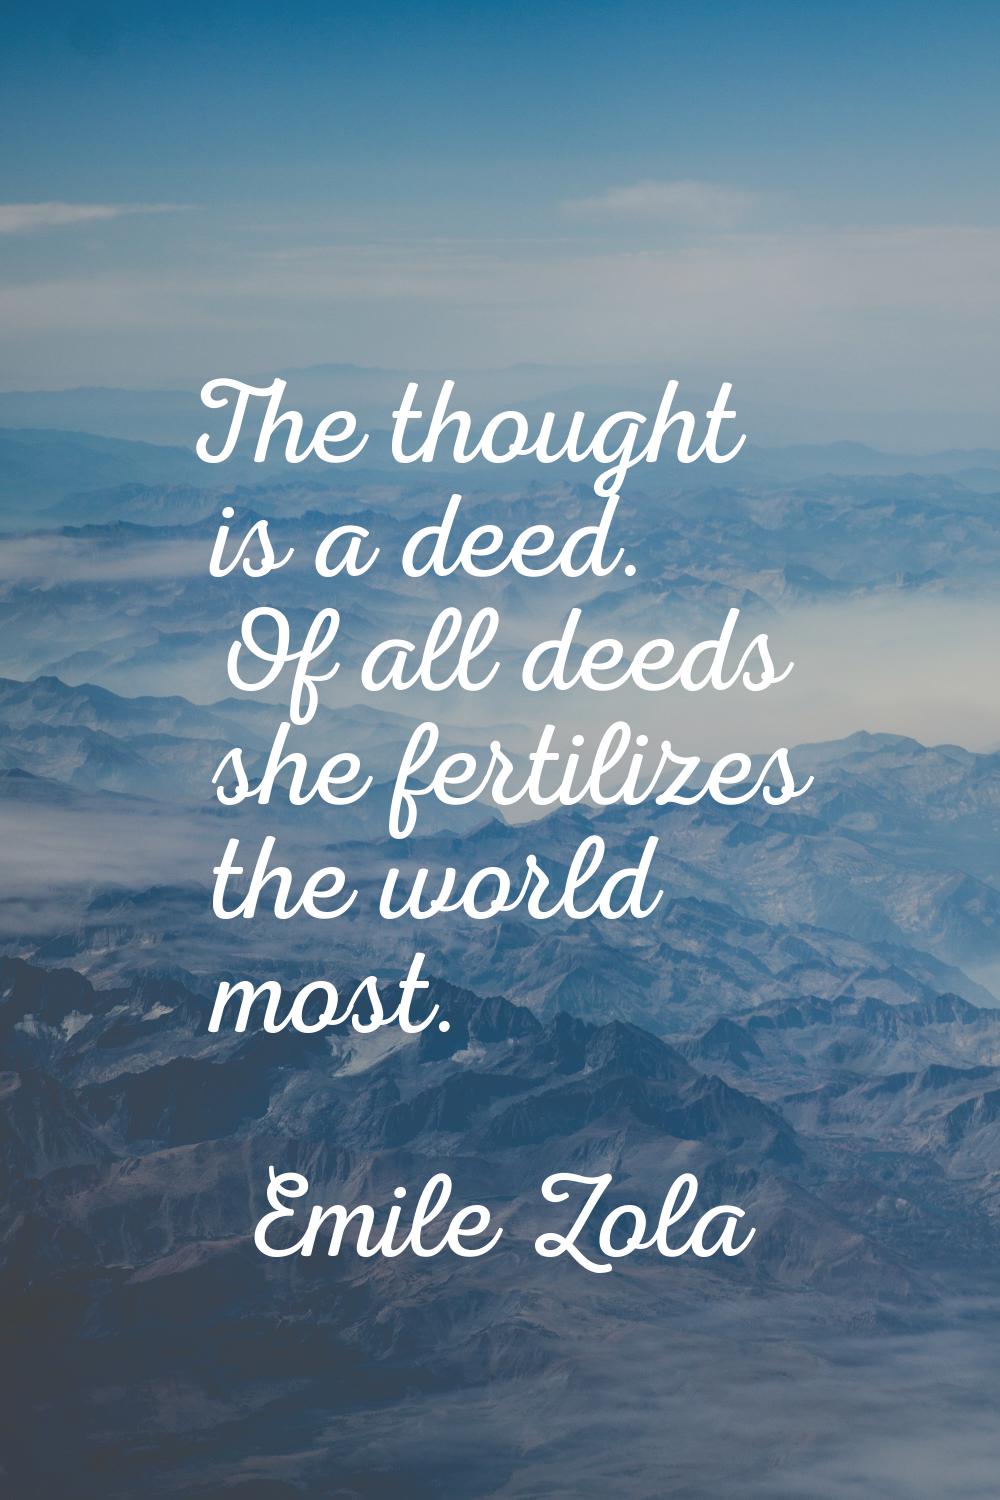 The thought is a deed. Of all deeds she fertilizes the world most.